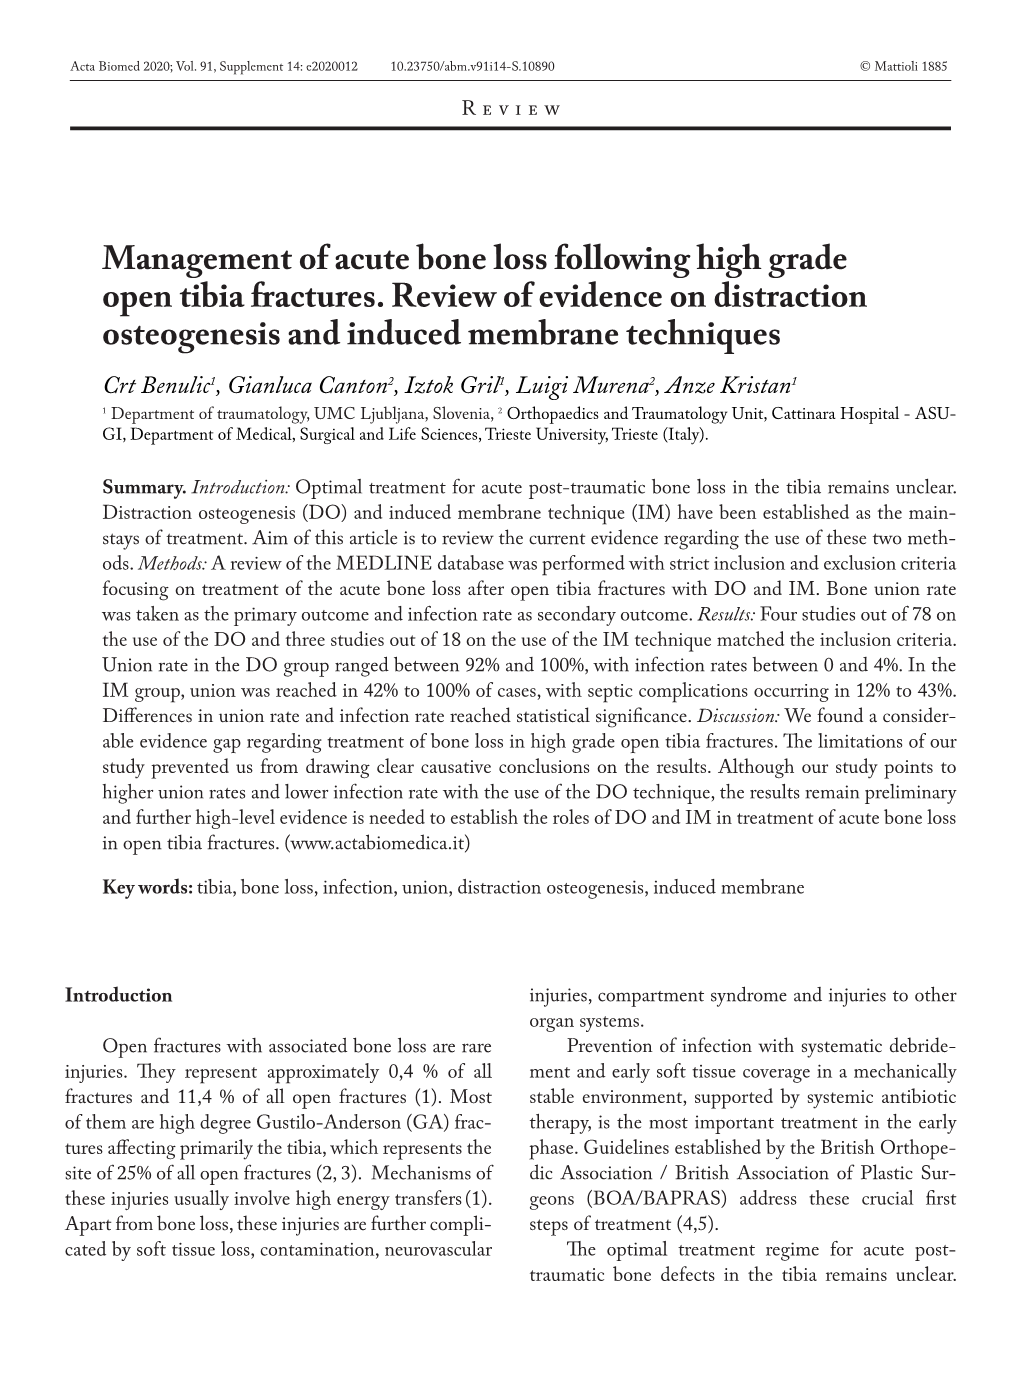 Management of Acute Bone Loss Following High Grade Open Tibia Fractures